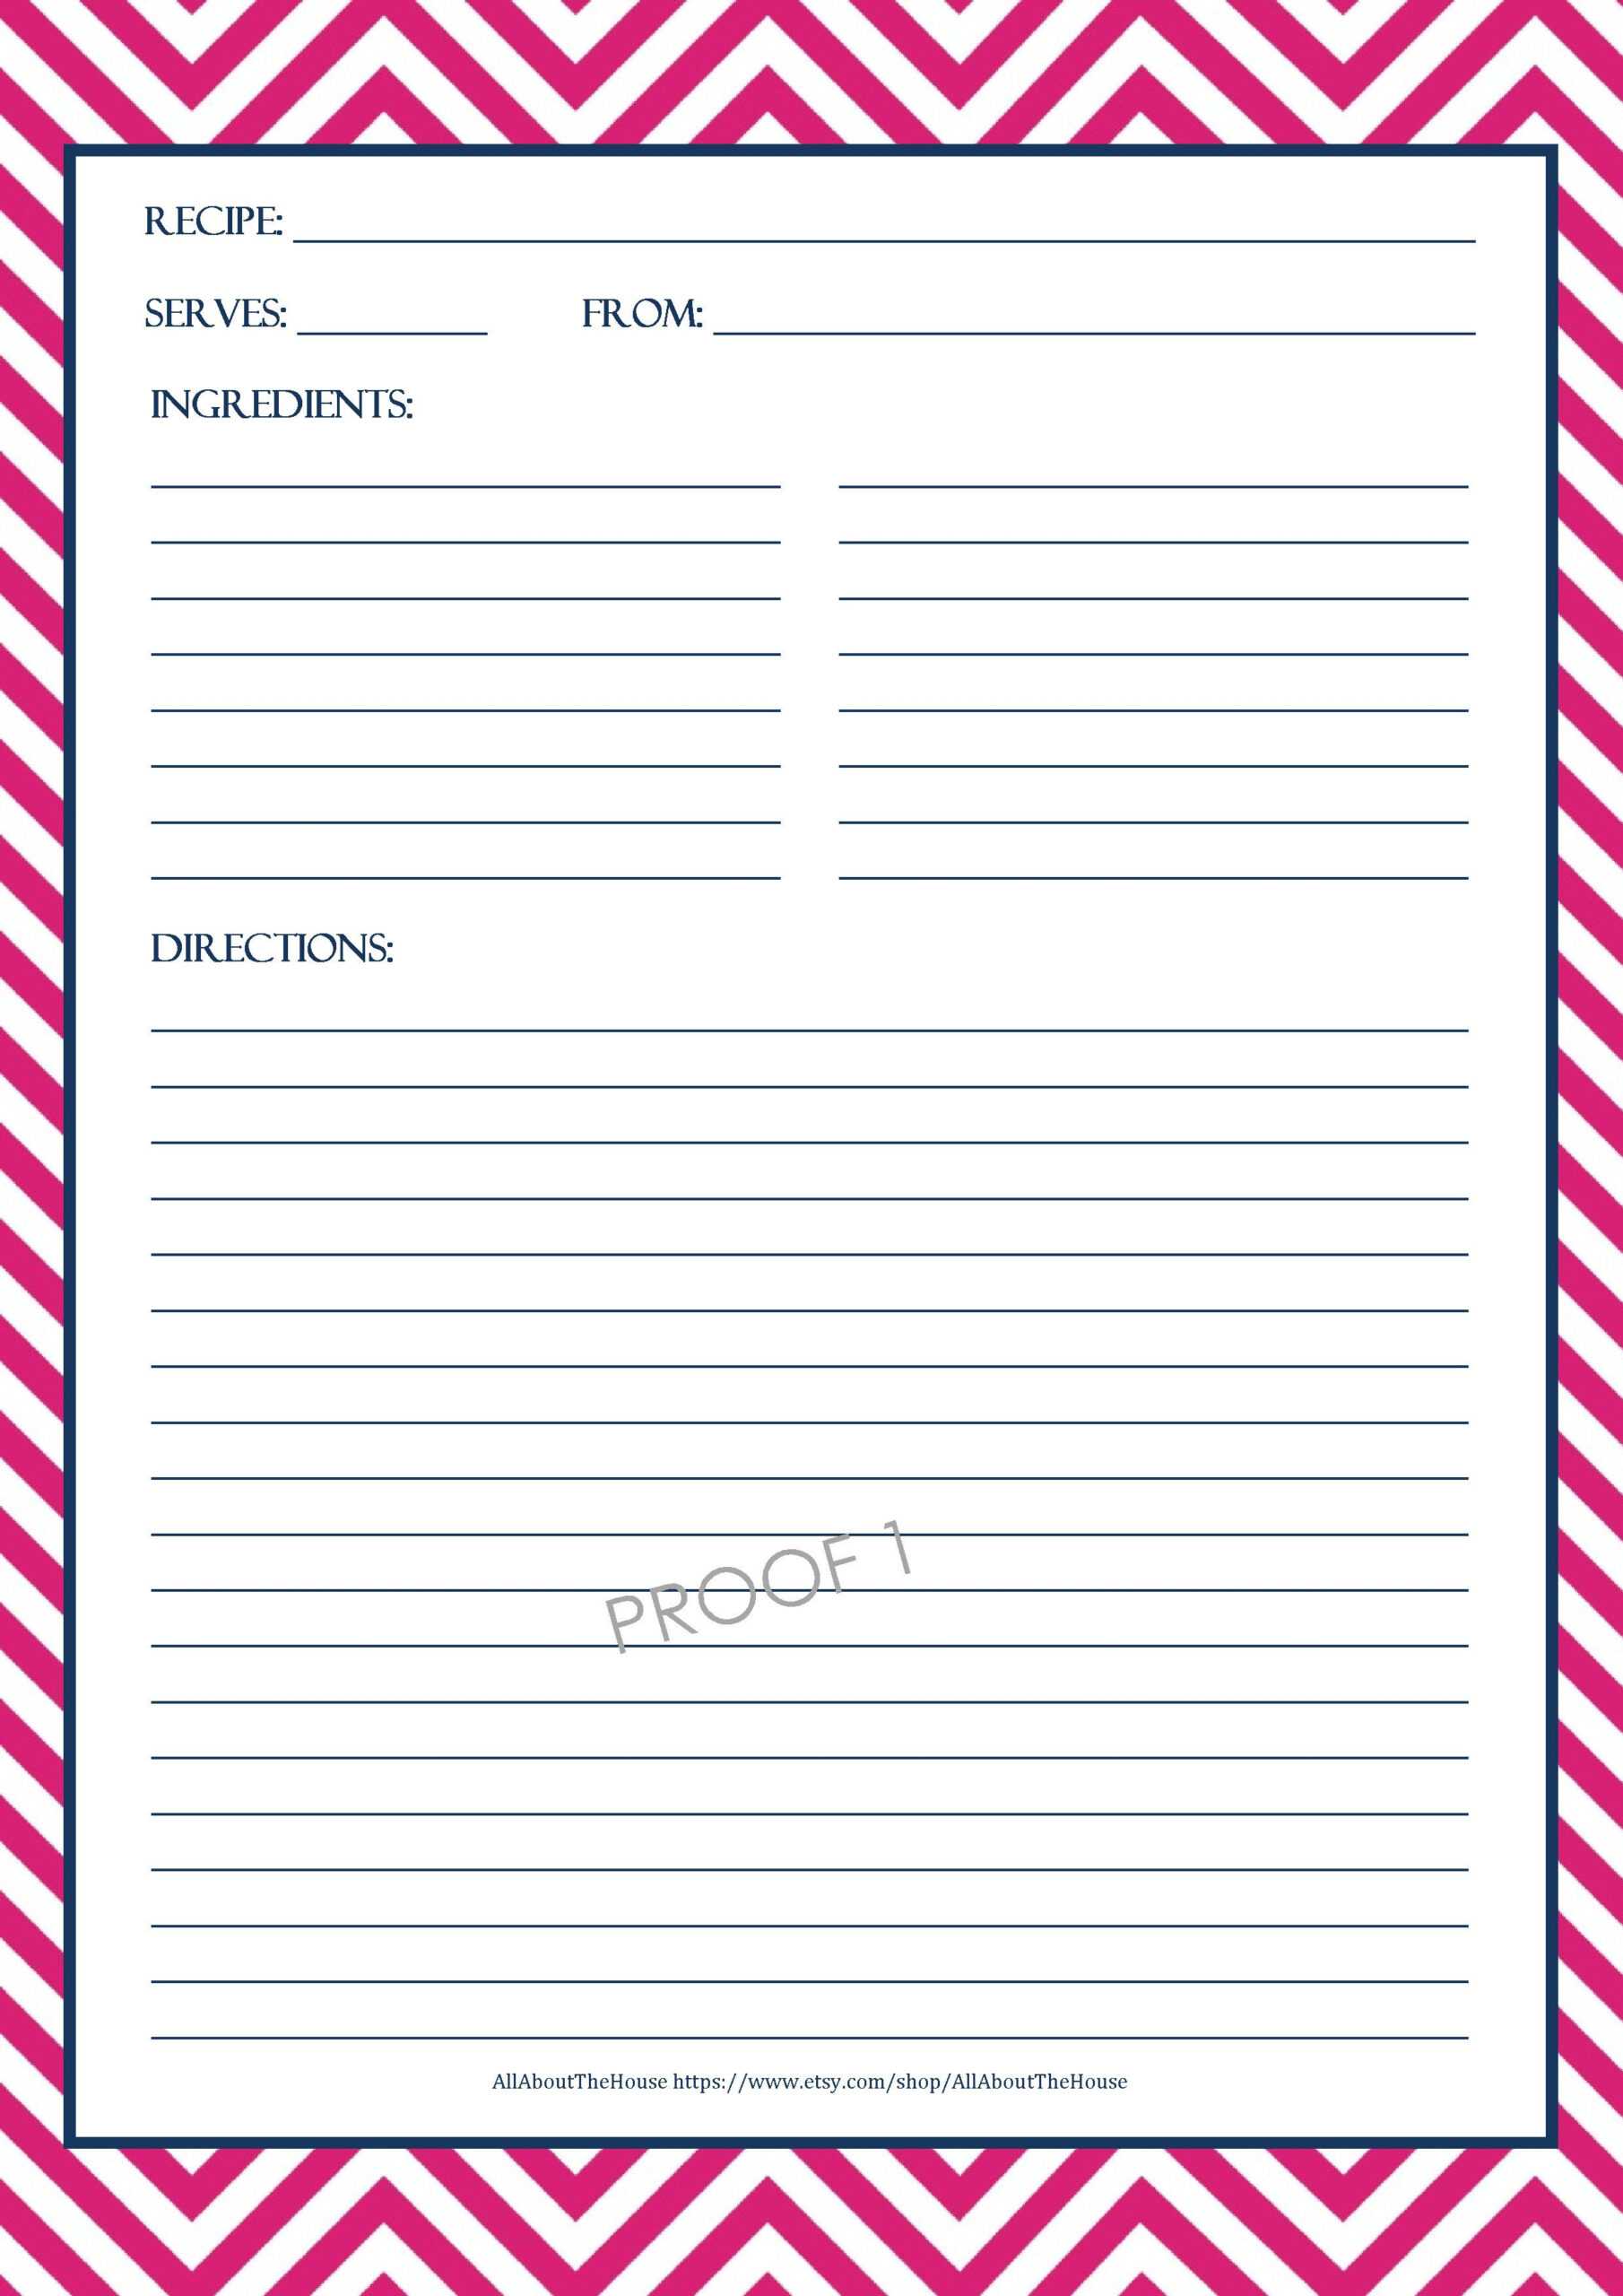 024 Recipe Card Template For Word Free Ideas Unbelievable Pertaining To Free Recipe Card Templates For Microsoft Word